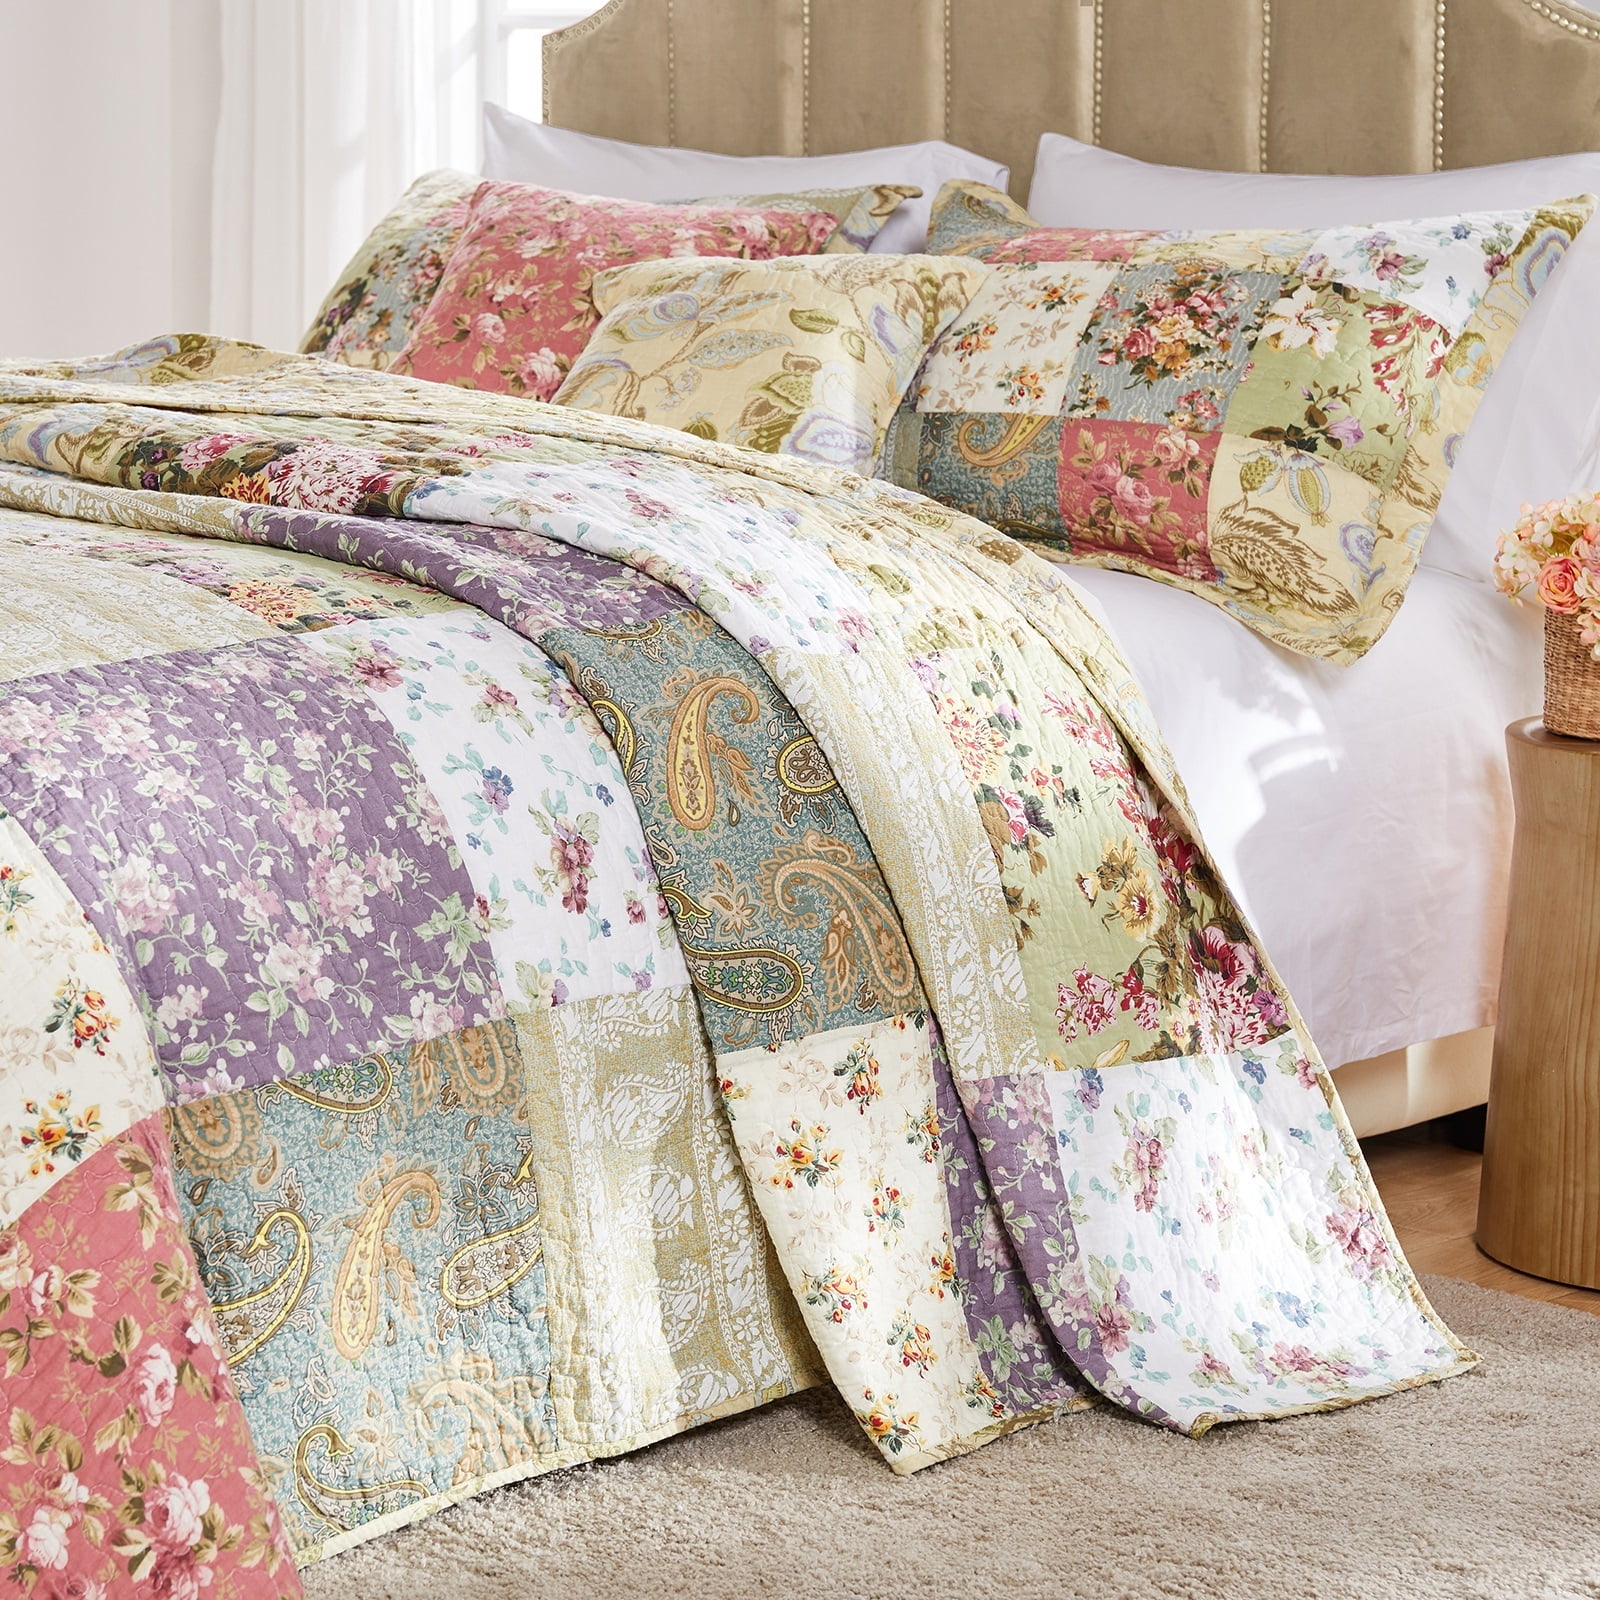 Details about   Colorful Quilted Bedspread & Pillow Shams Set Abstract Flowers Roses Print